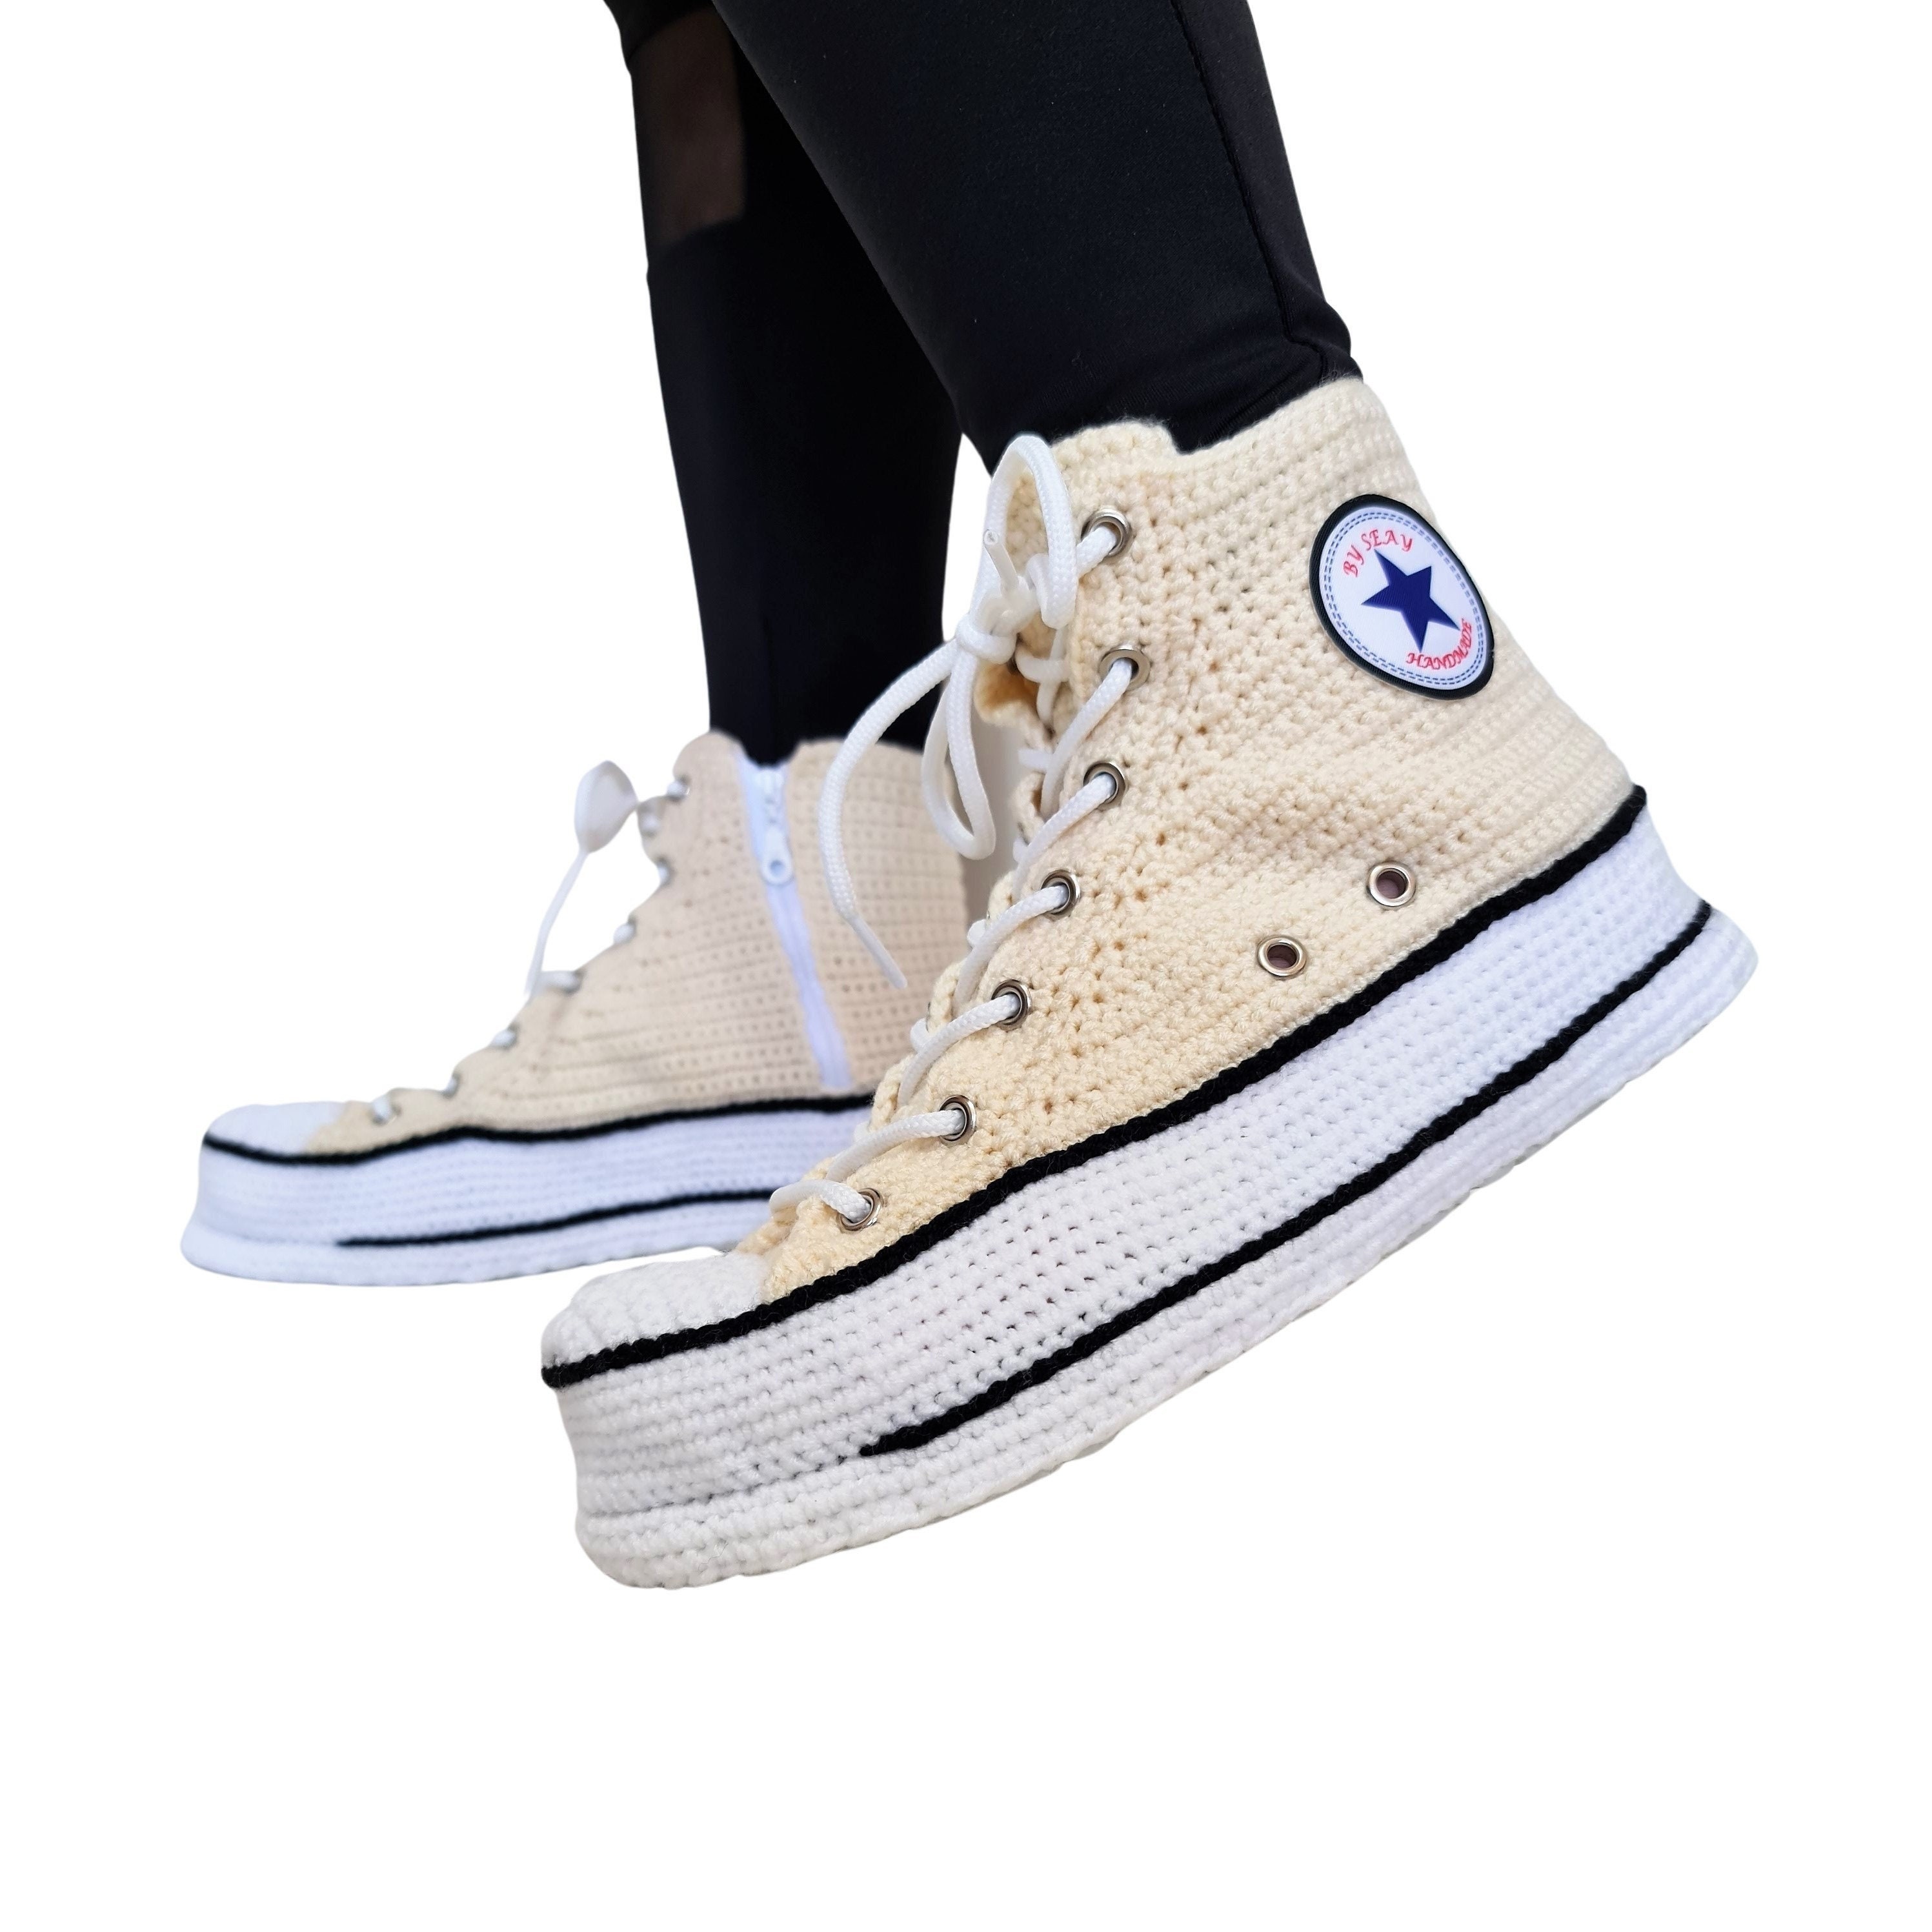 White Converse High Tops Platform Sneakers - Etsy